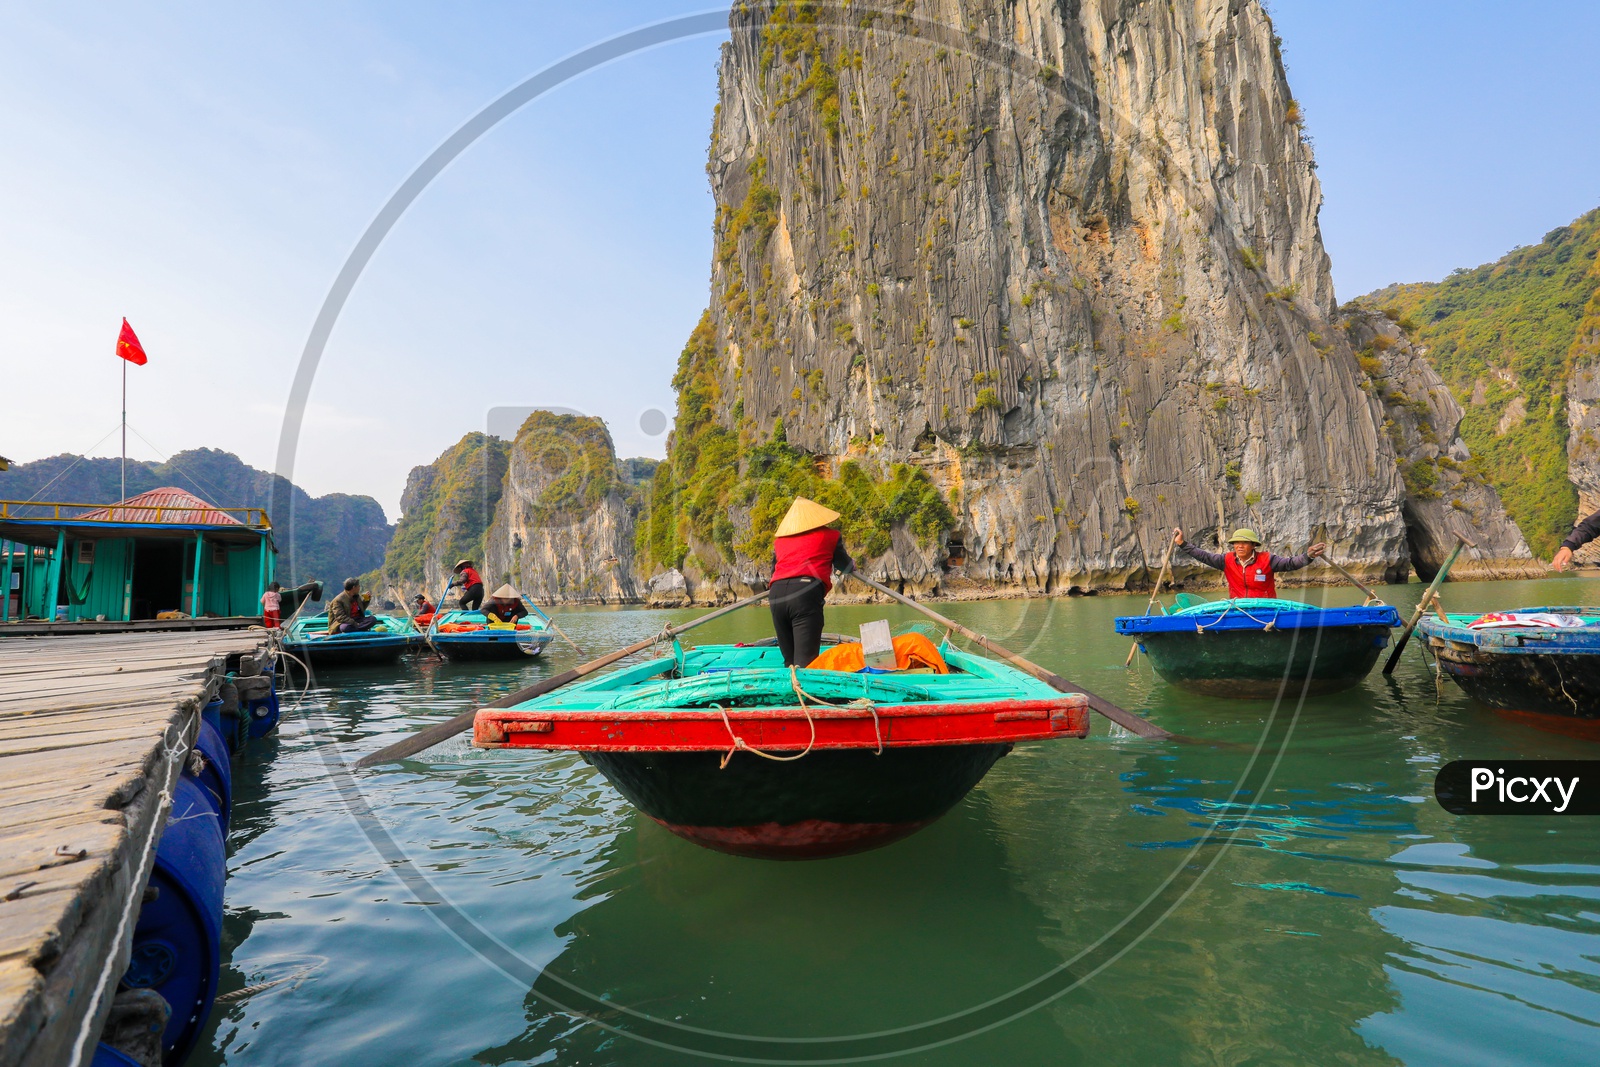 Rowers waiting for tourist passengers on Bamboo Boat at Halong Bay, Vietnam.